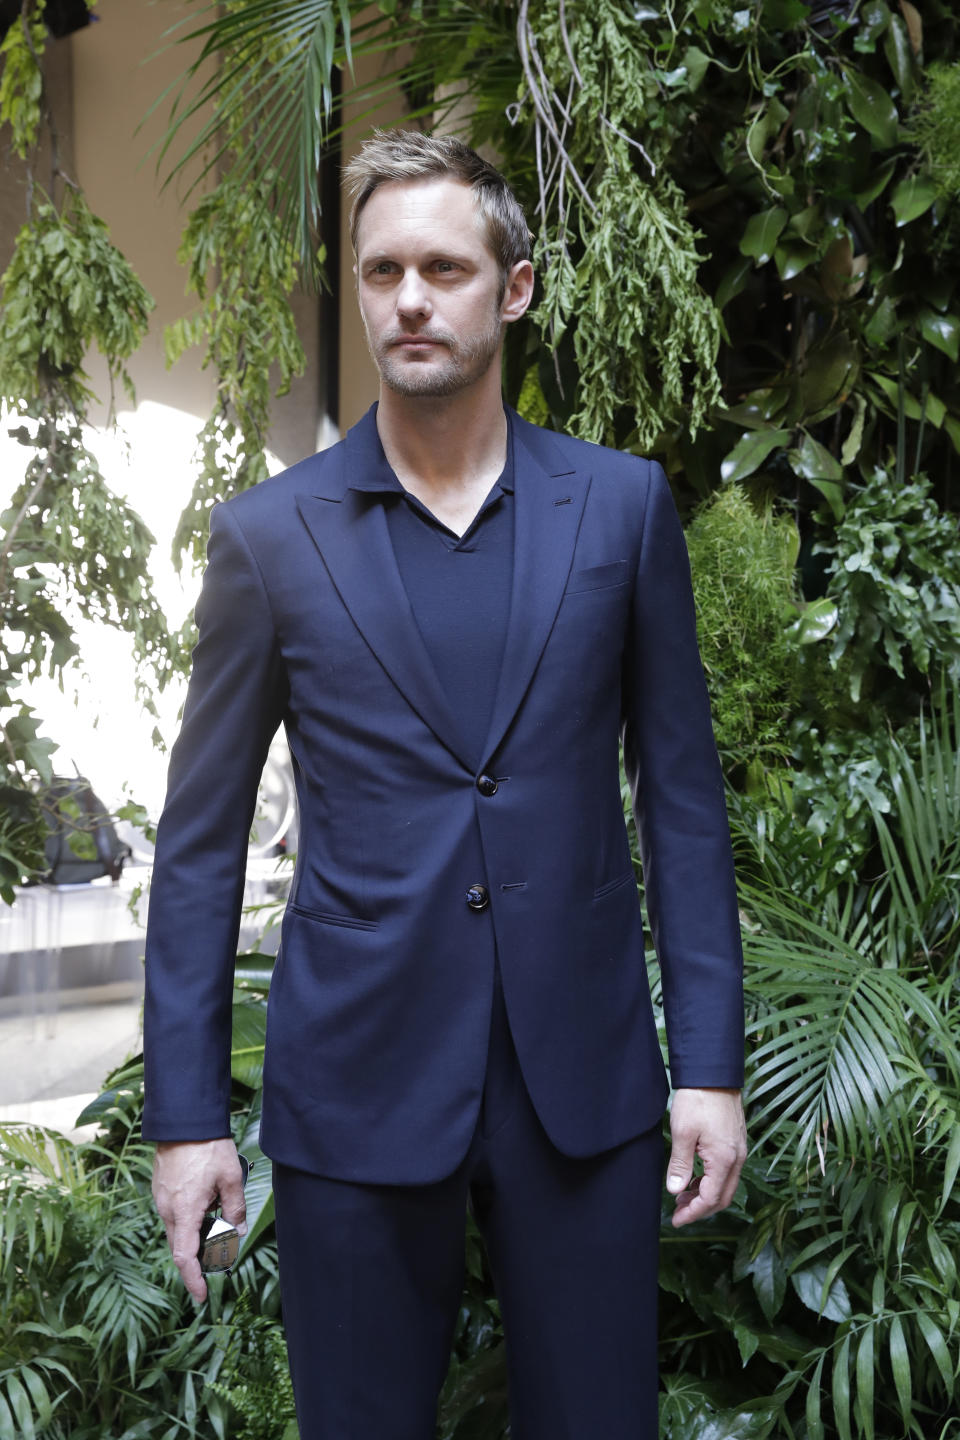 Actor Alexander Skarsgard attends the Armani men's Spring-Summer 2020 collection, unveiled during the fashion week, in Milan, Italy, Monday, June 17, 2019. (AP Photo/Luca Bruno)